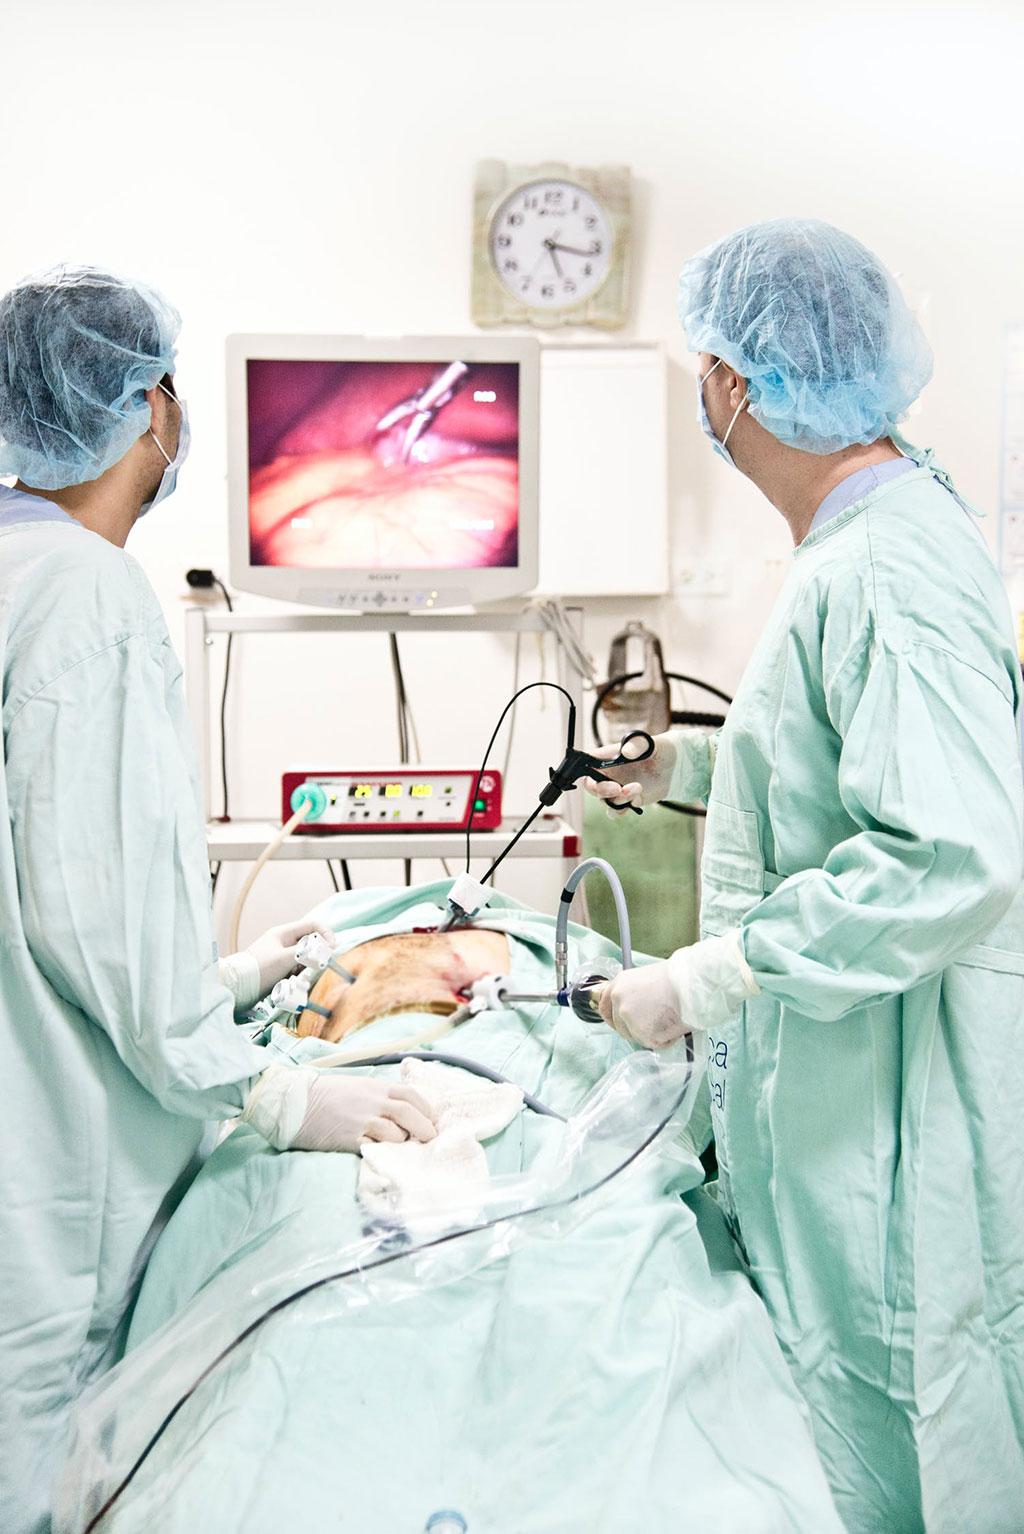 Image: Global surgical navigation systems market to surpass USD 1.6 billion by 2027 (Photo courtesy of Pexels)